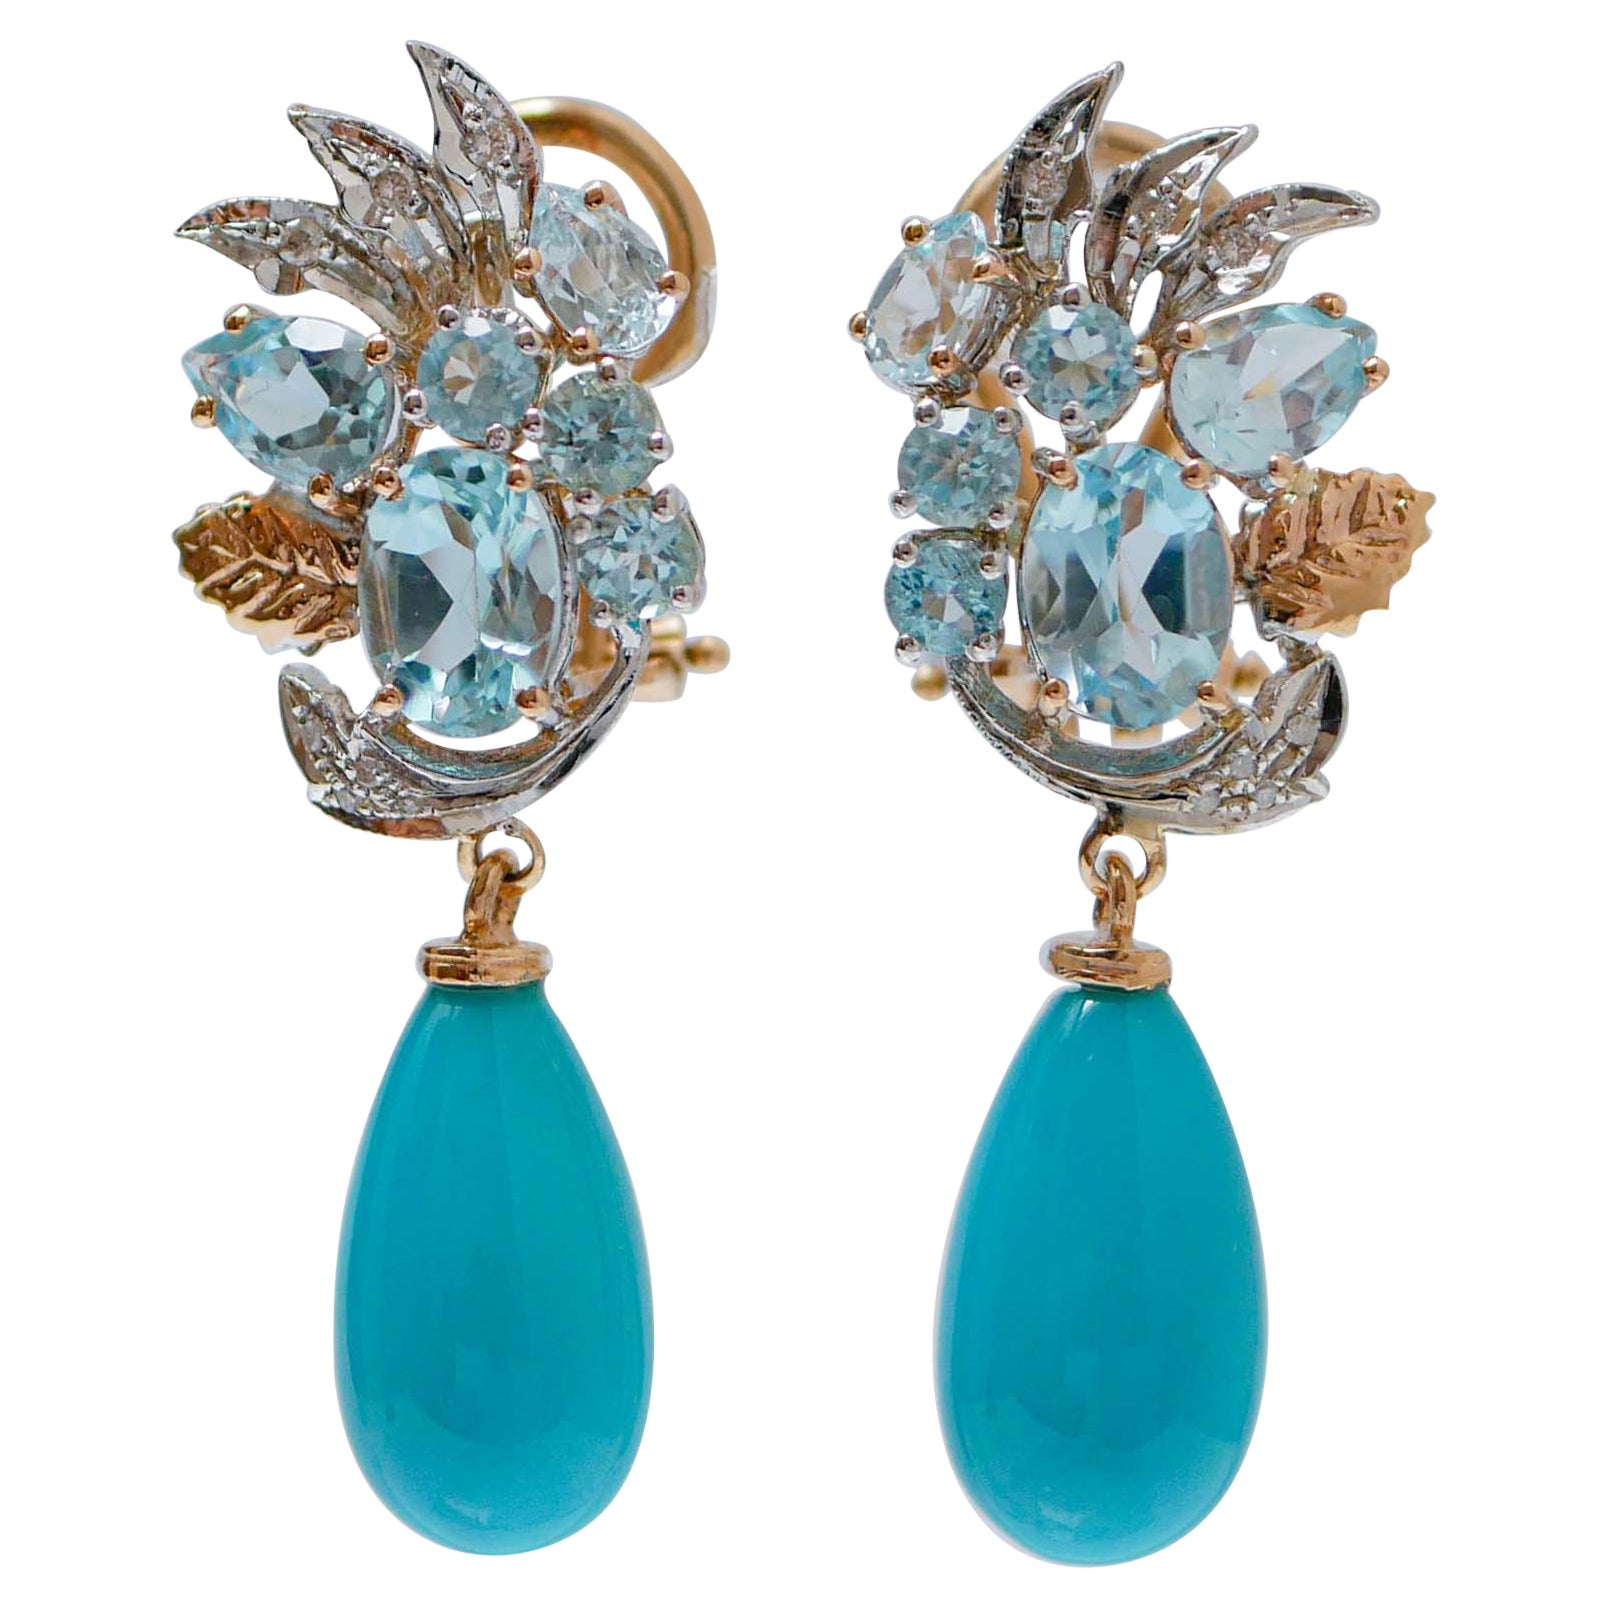 Turquoise, Topazs, Diamonds, 14 Kt White Gold and Rose Gold Earrings.